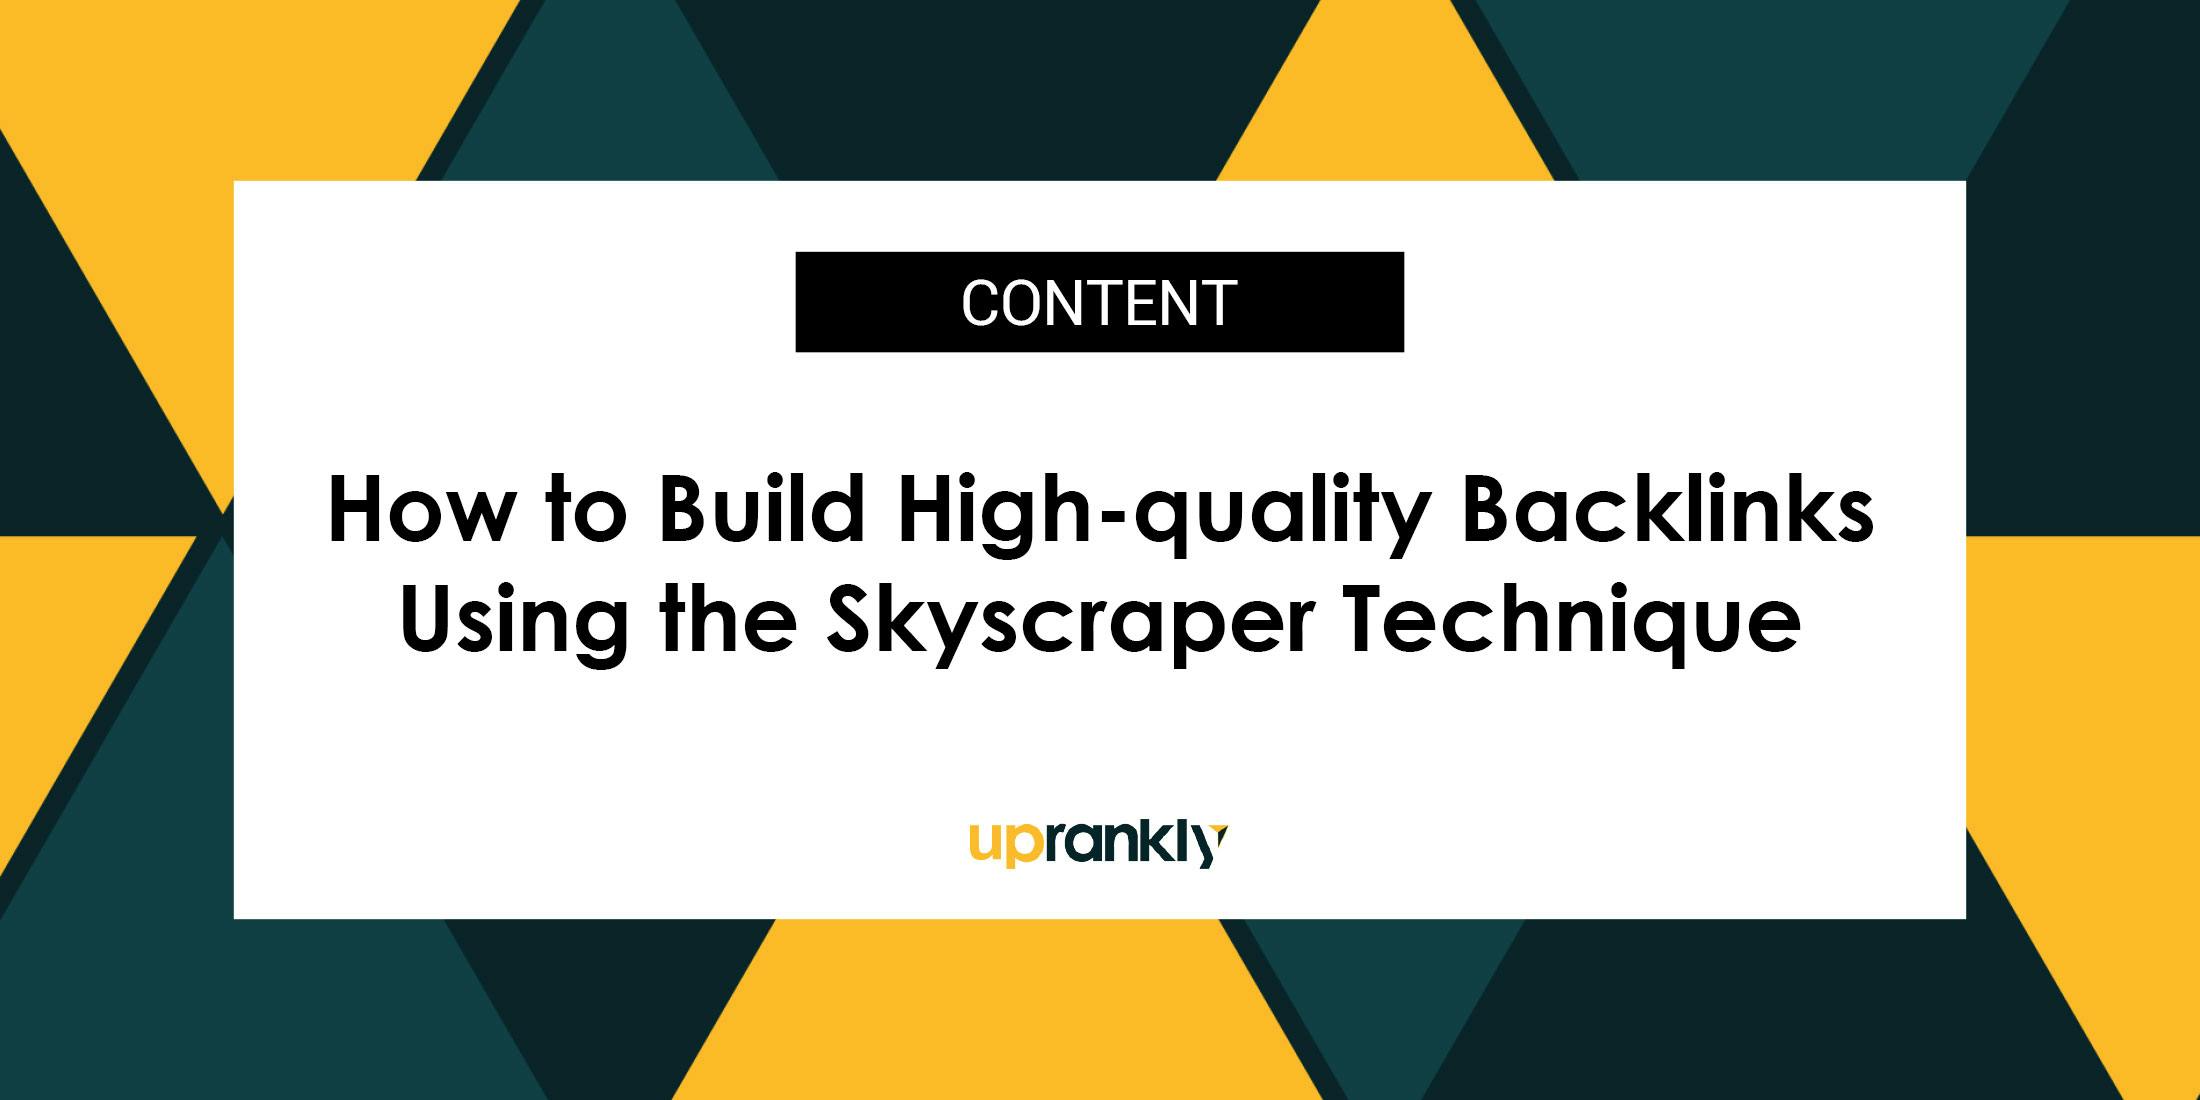 How to Build High-quality Backlinks Using the Skyscraper Technique